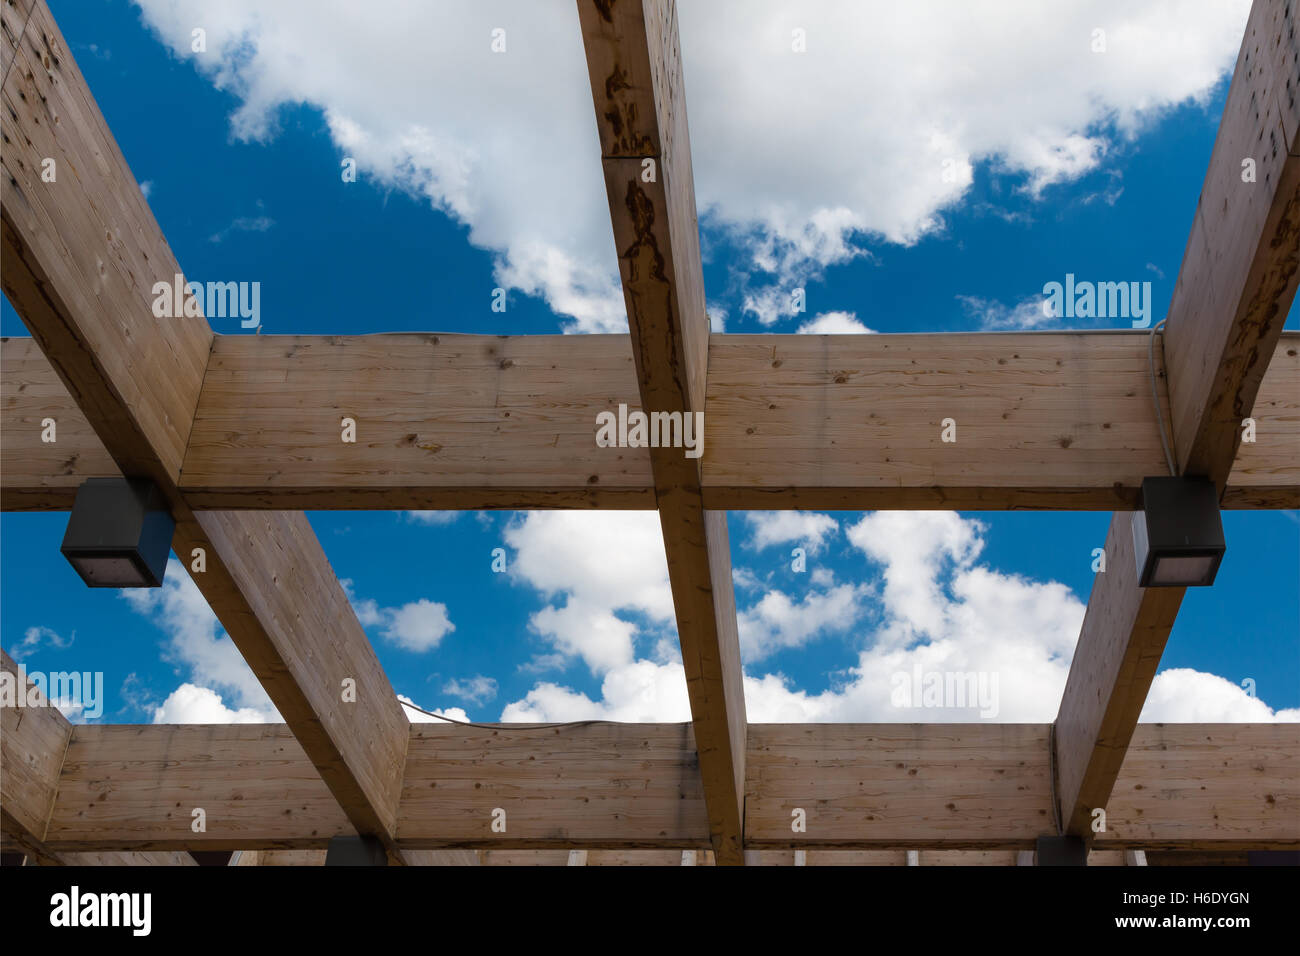 Wooden Ceiling Structure: Building with Modern Architectural Design at Universal Exposition in Milan, Italy 2015 Stock Photo